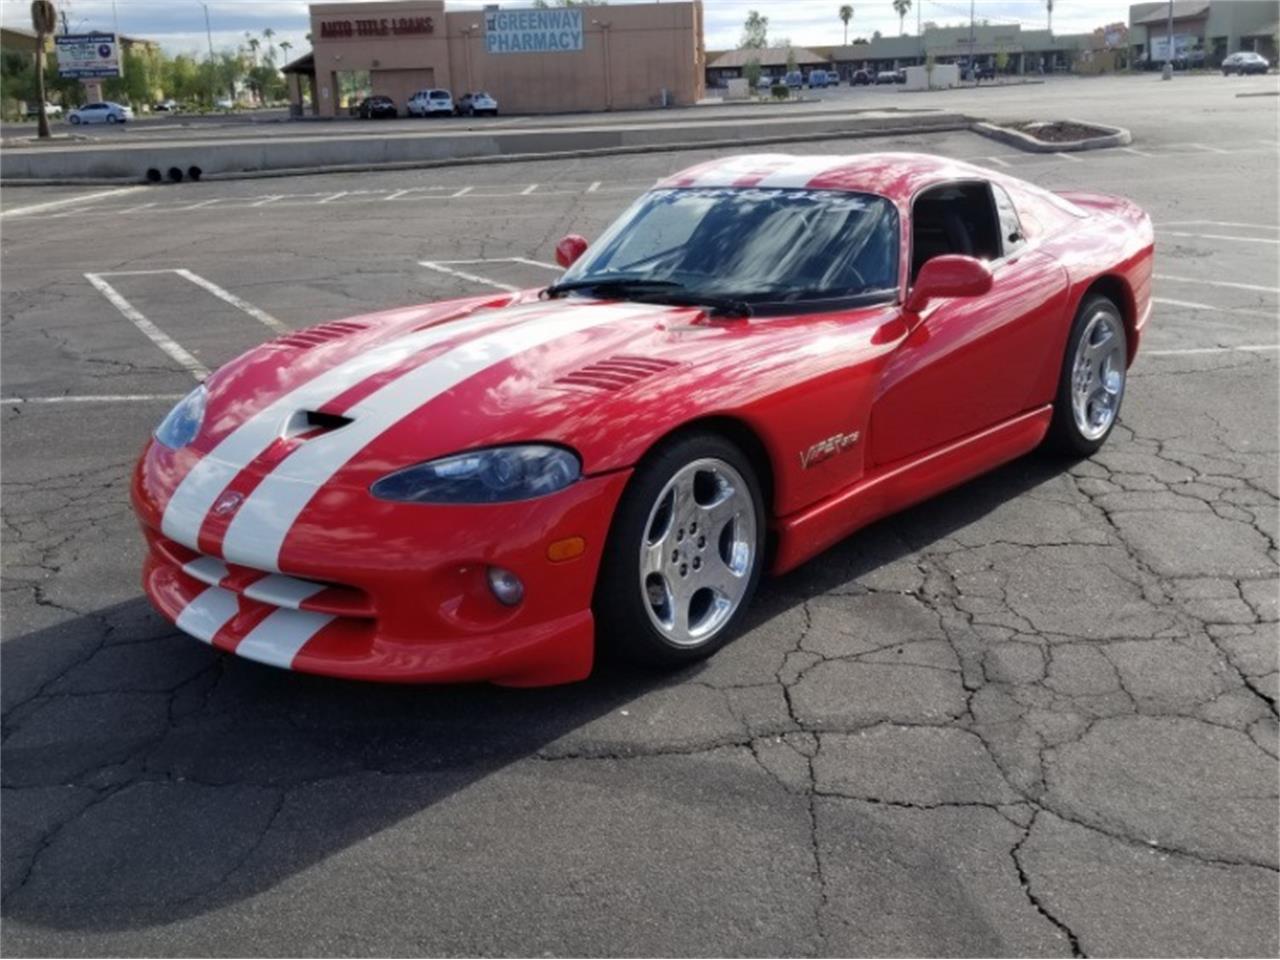 For Sale at Auction: 2002 Dodge Viper for sale in Peoria, AZ